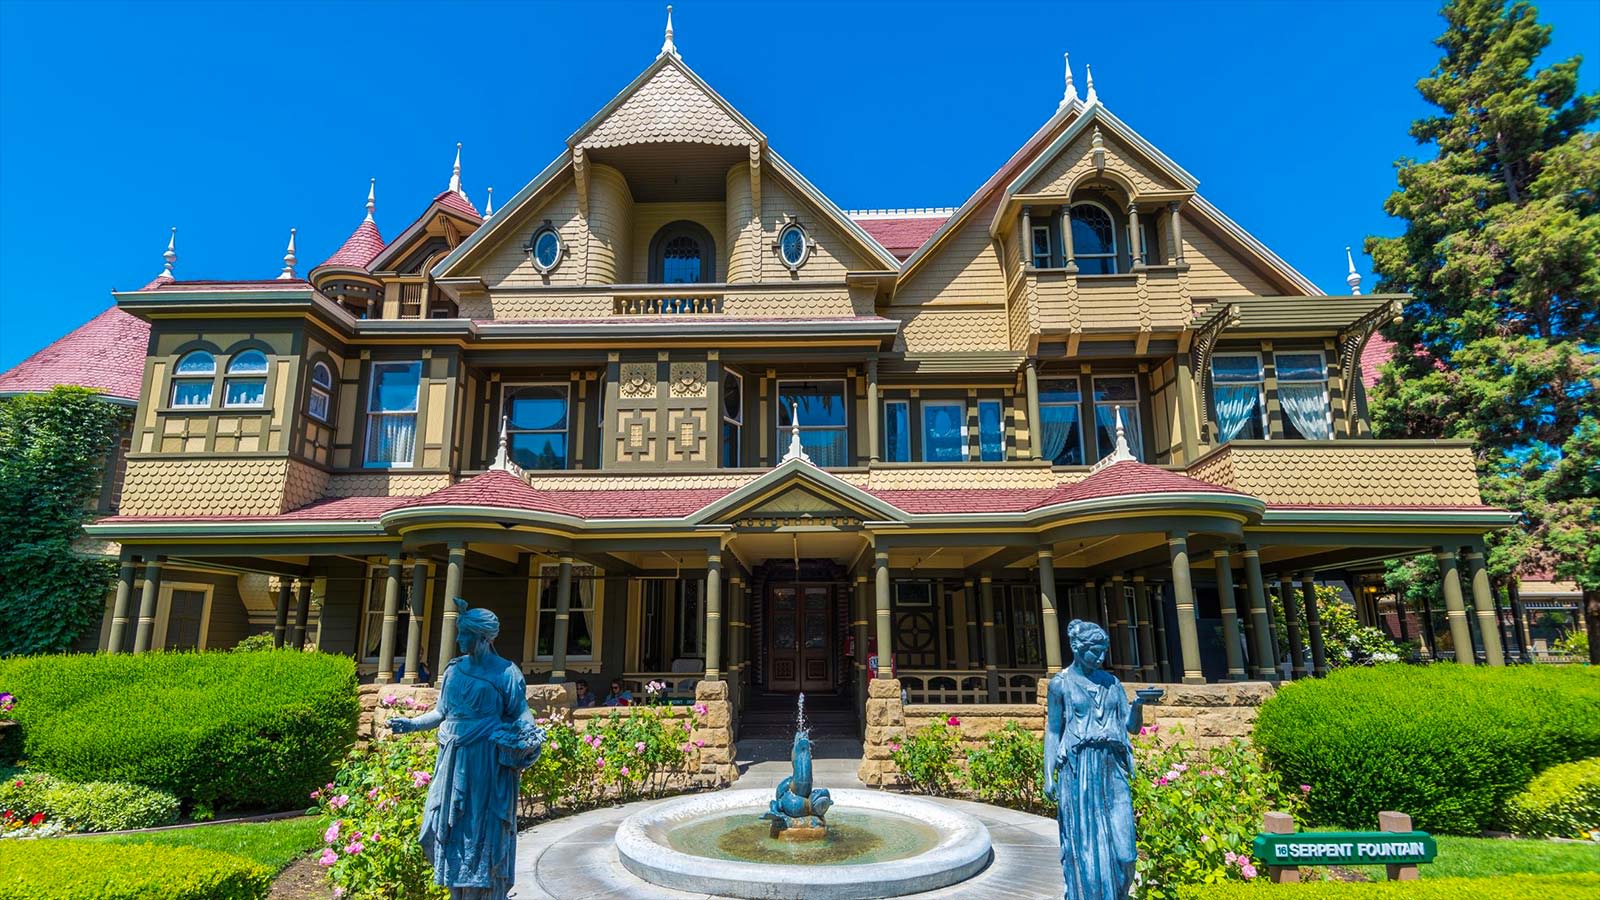 Amityville Horror House or Winchester Mystery House